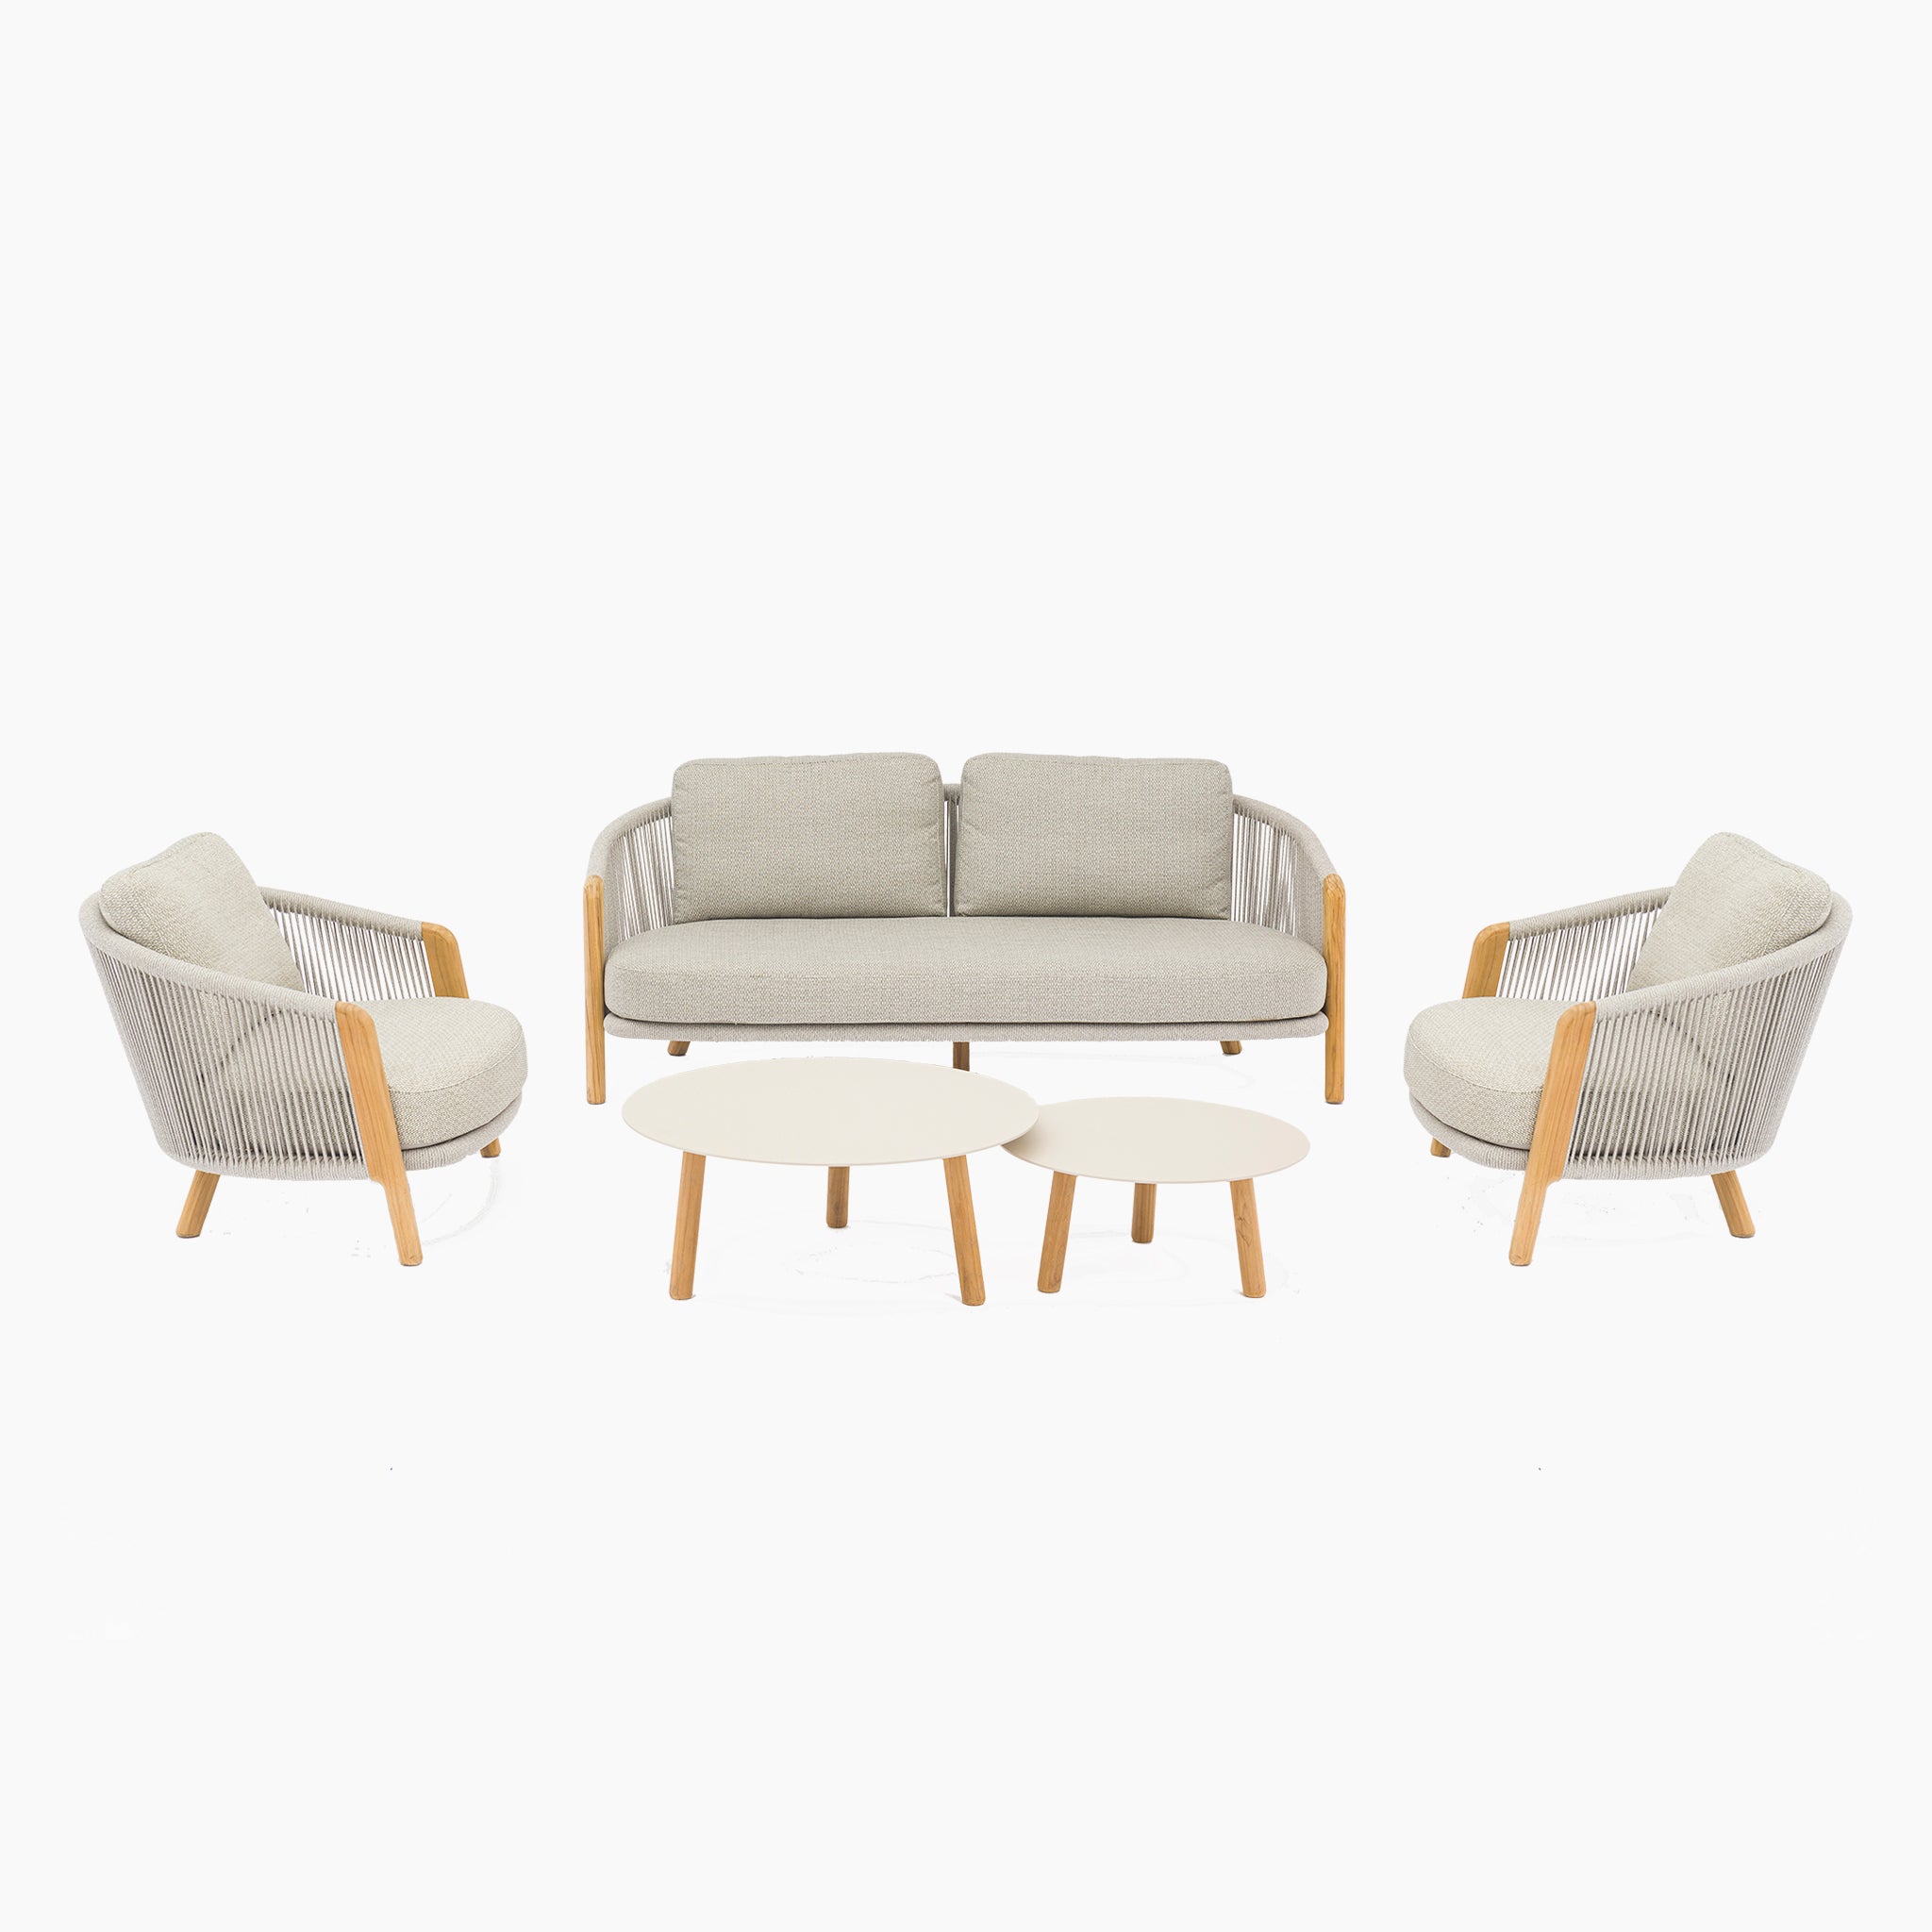 Merano 2 Seat Sofa Set and Coffee Tables in Latte